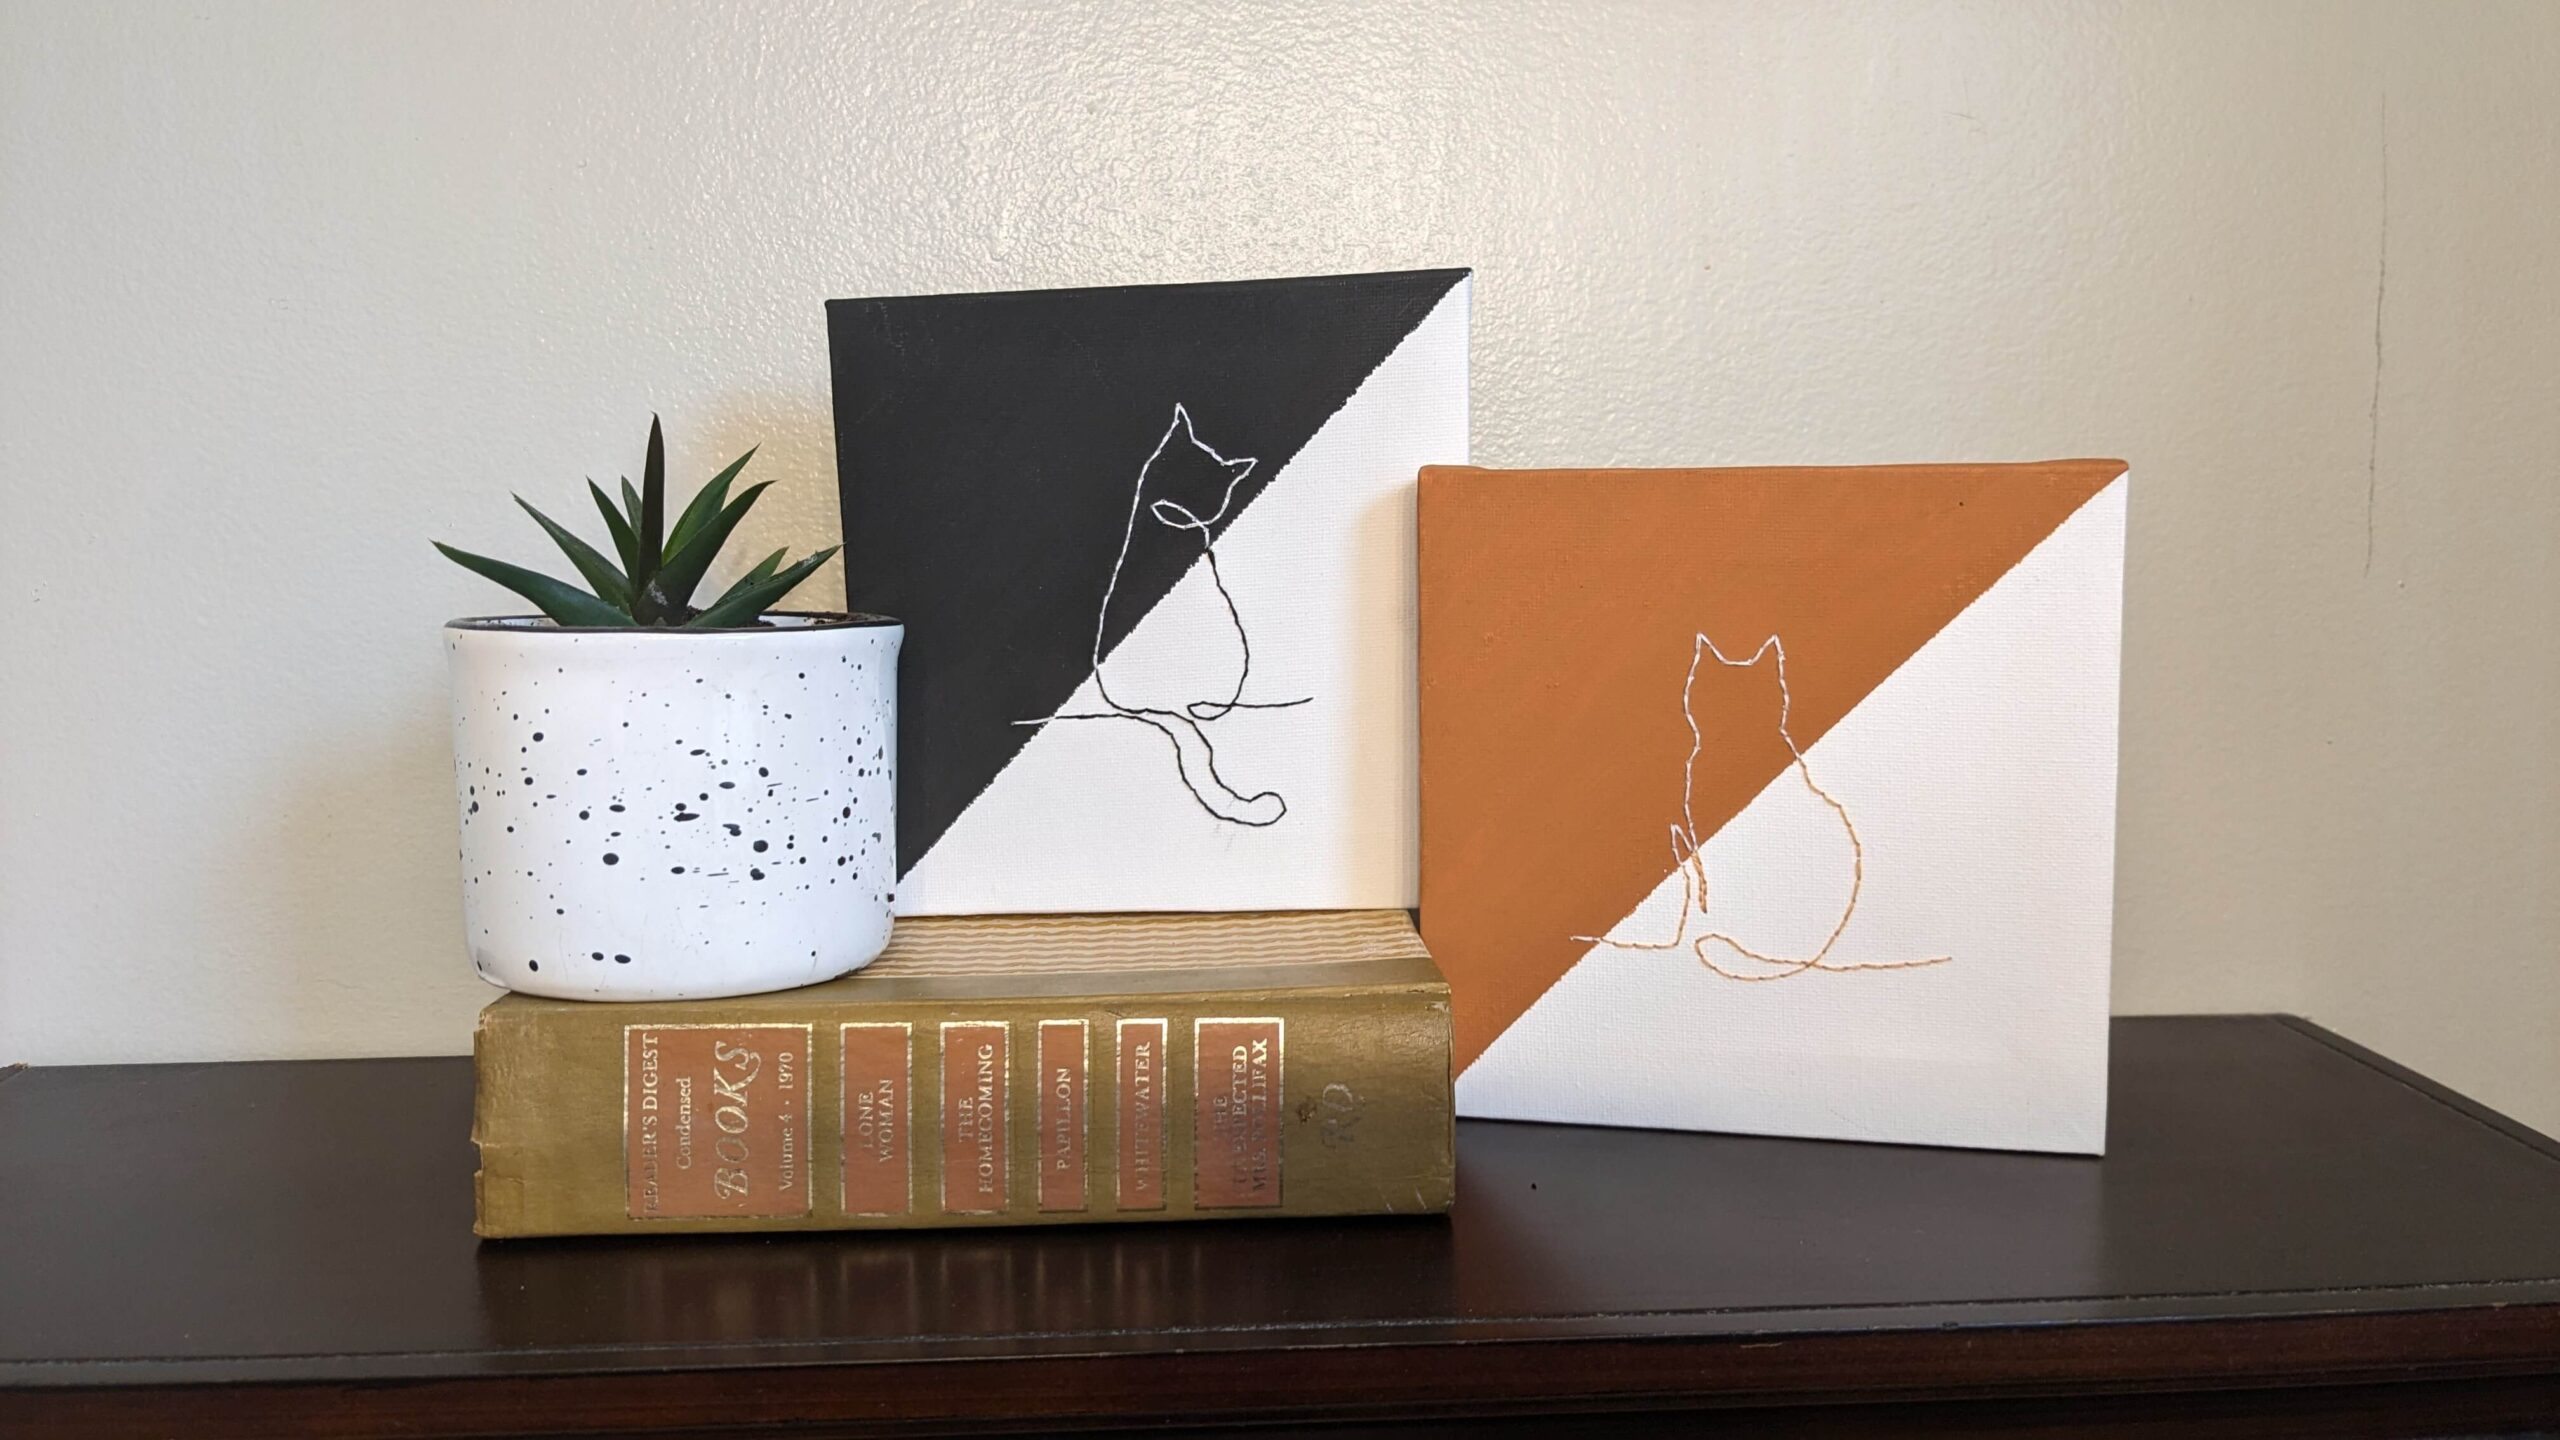 Two pet wall art canvases with cats embroidered on them on a brown shelf with a plant and book